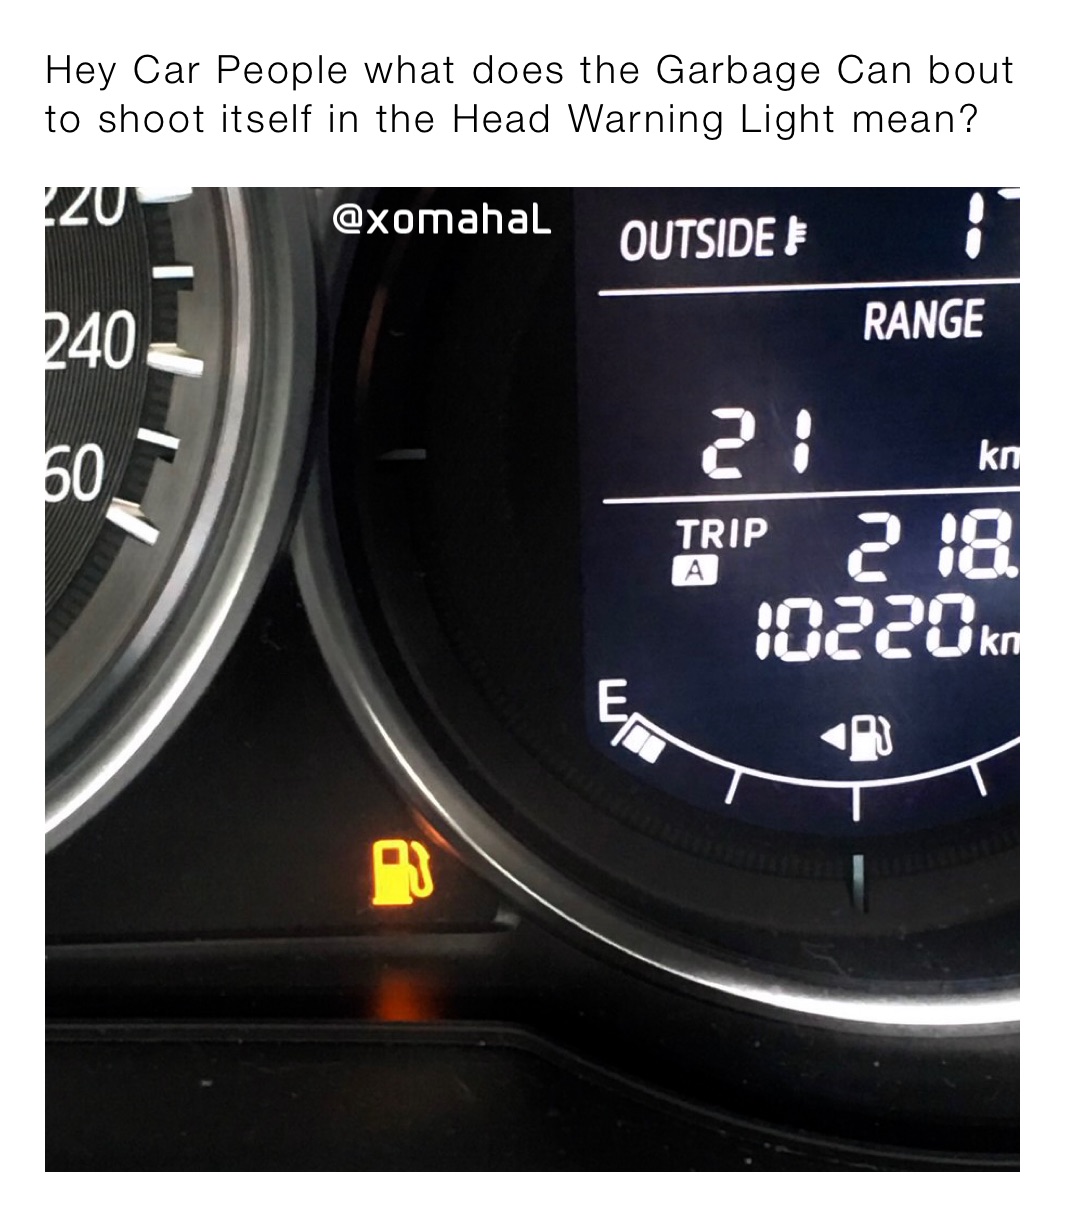 Hey Car People what does the Garbage Can bout to shoot itself in the Head Warning Light mean?